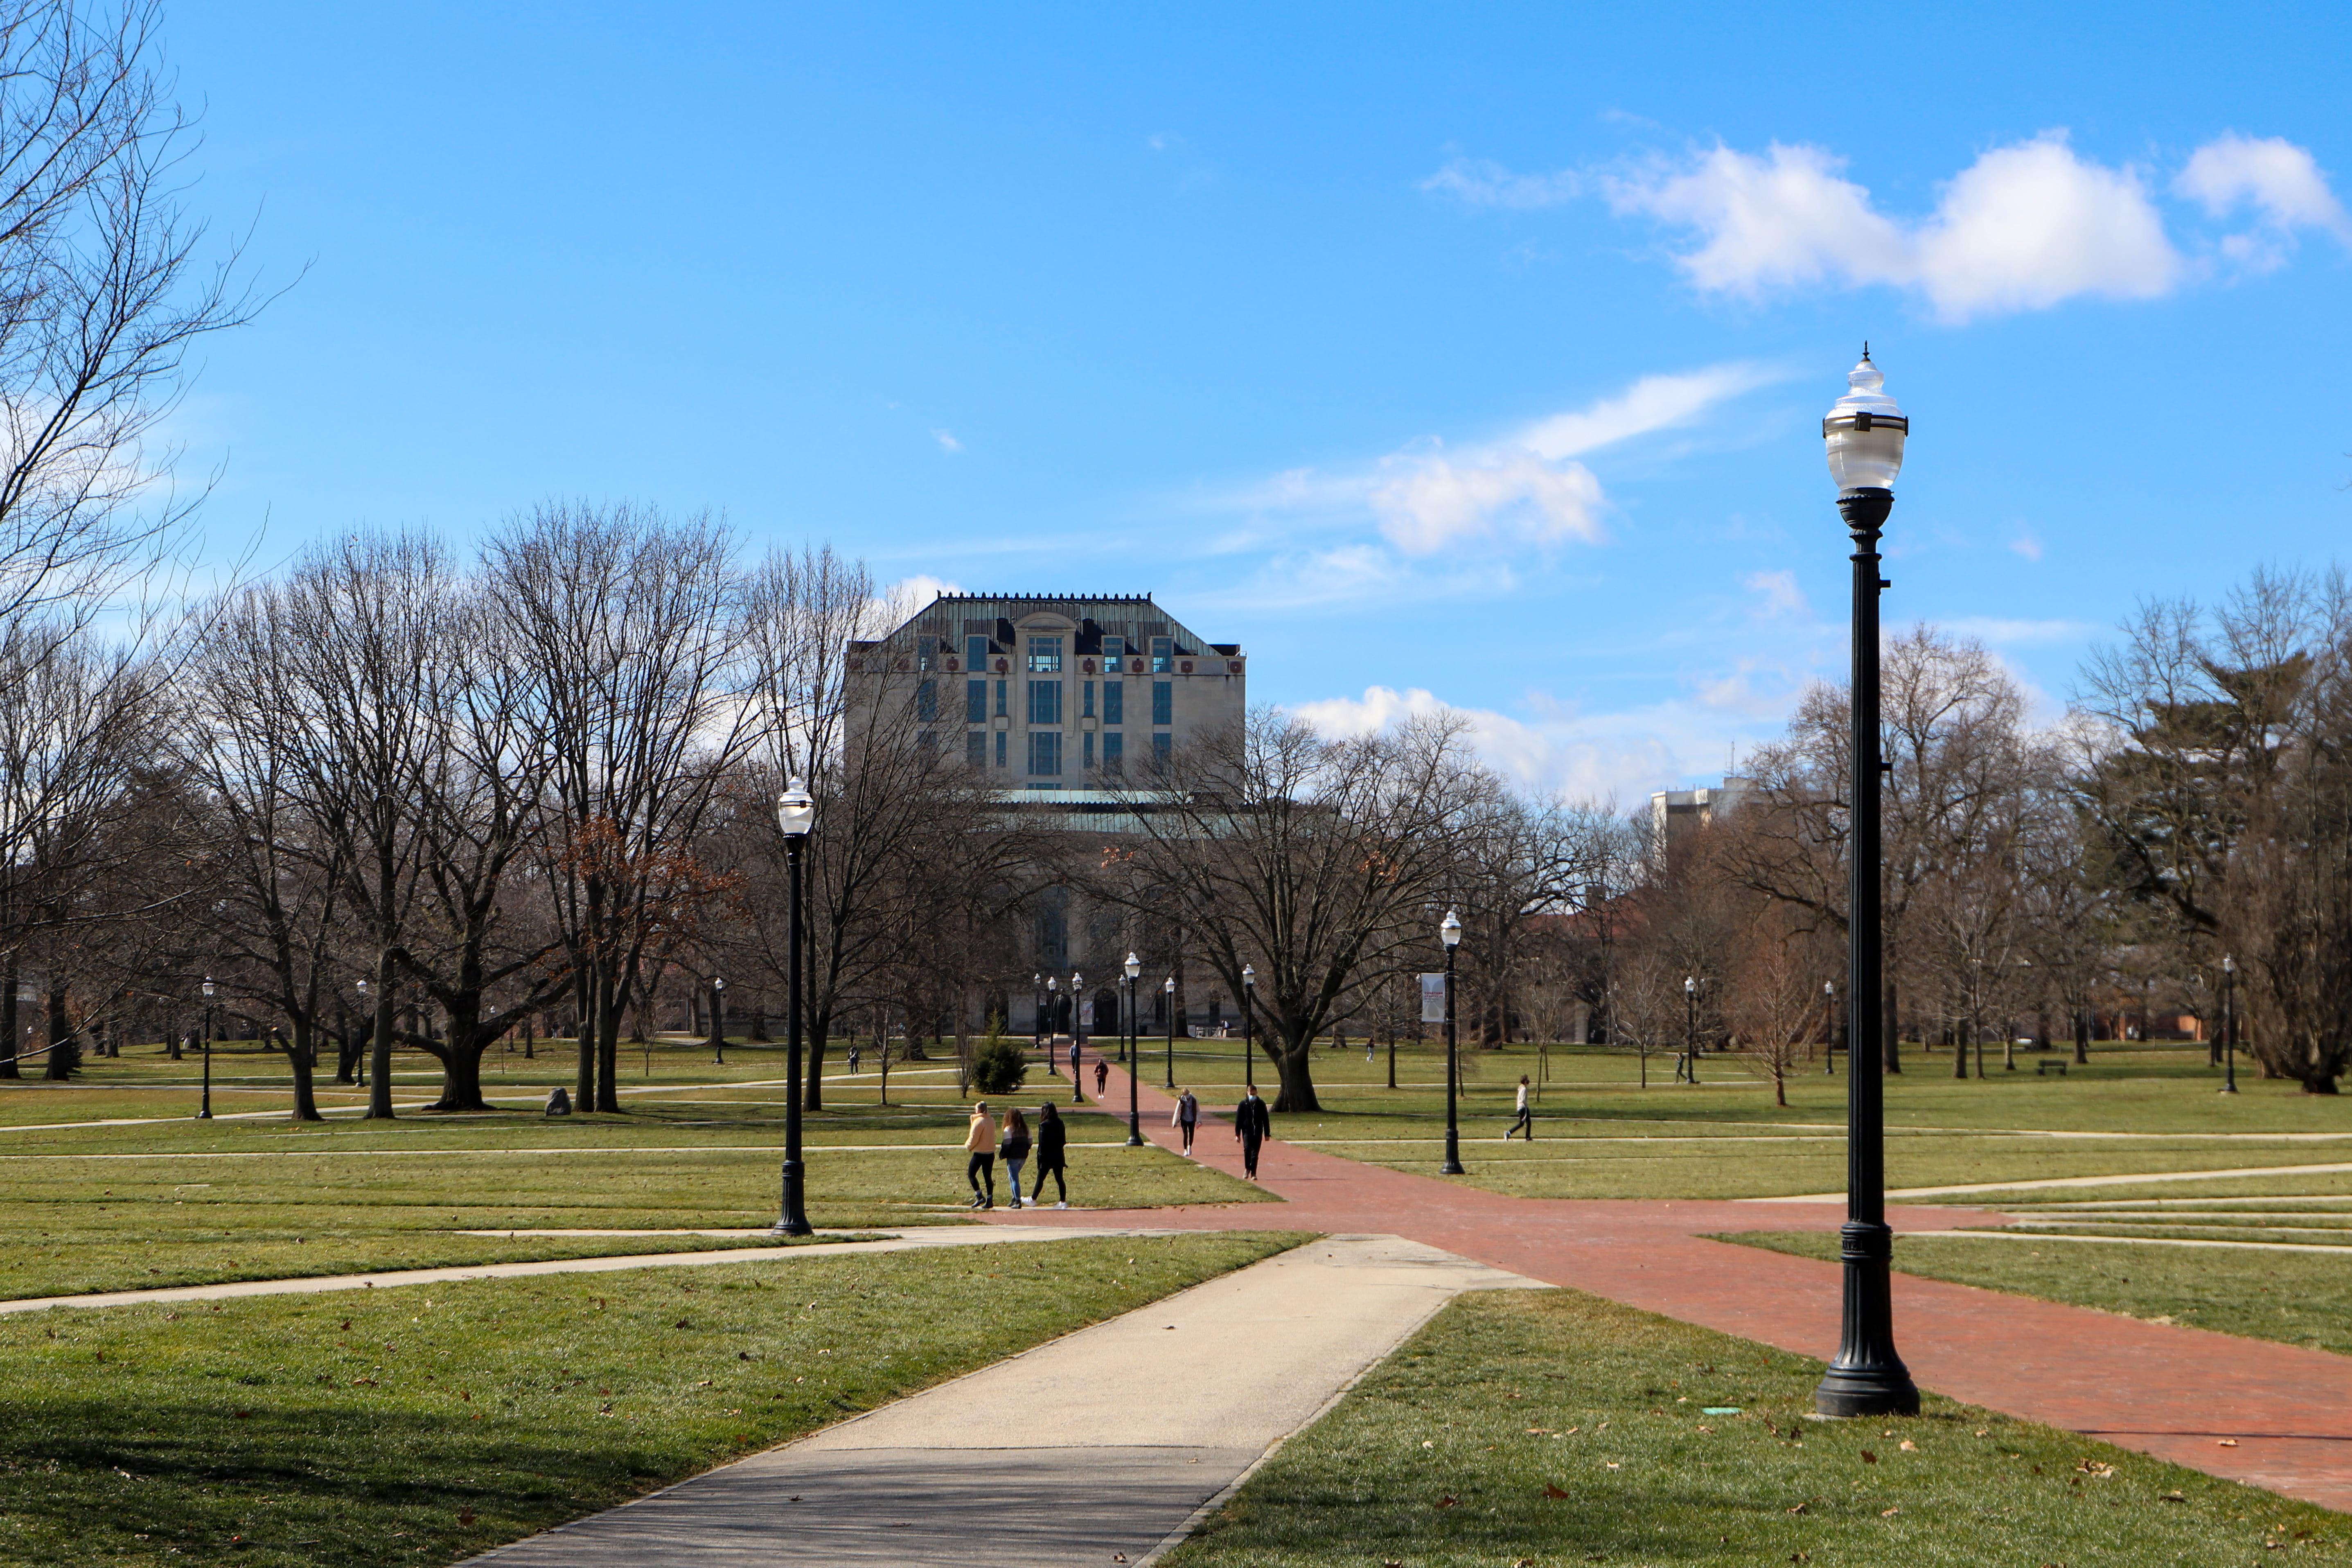 the Oval with people walking on paths and thompson library in the background